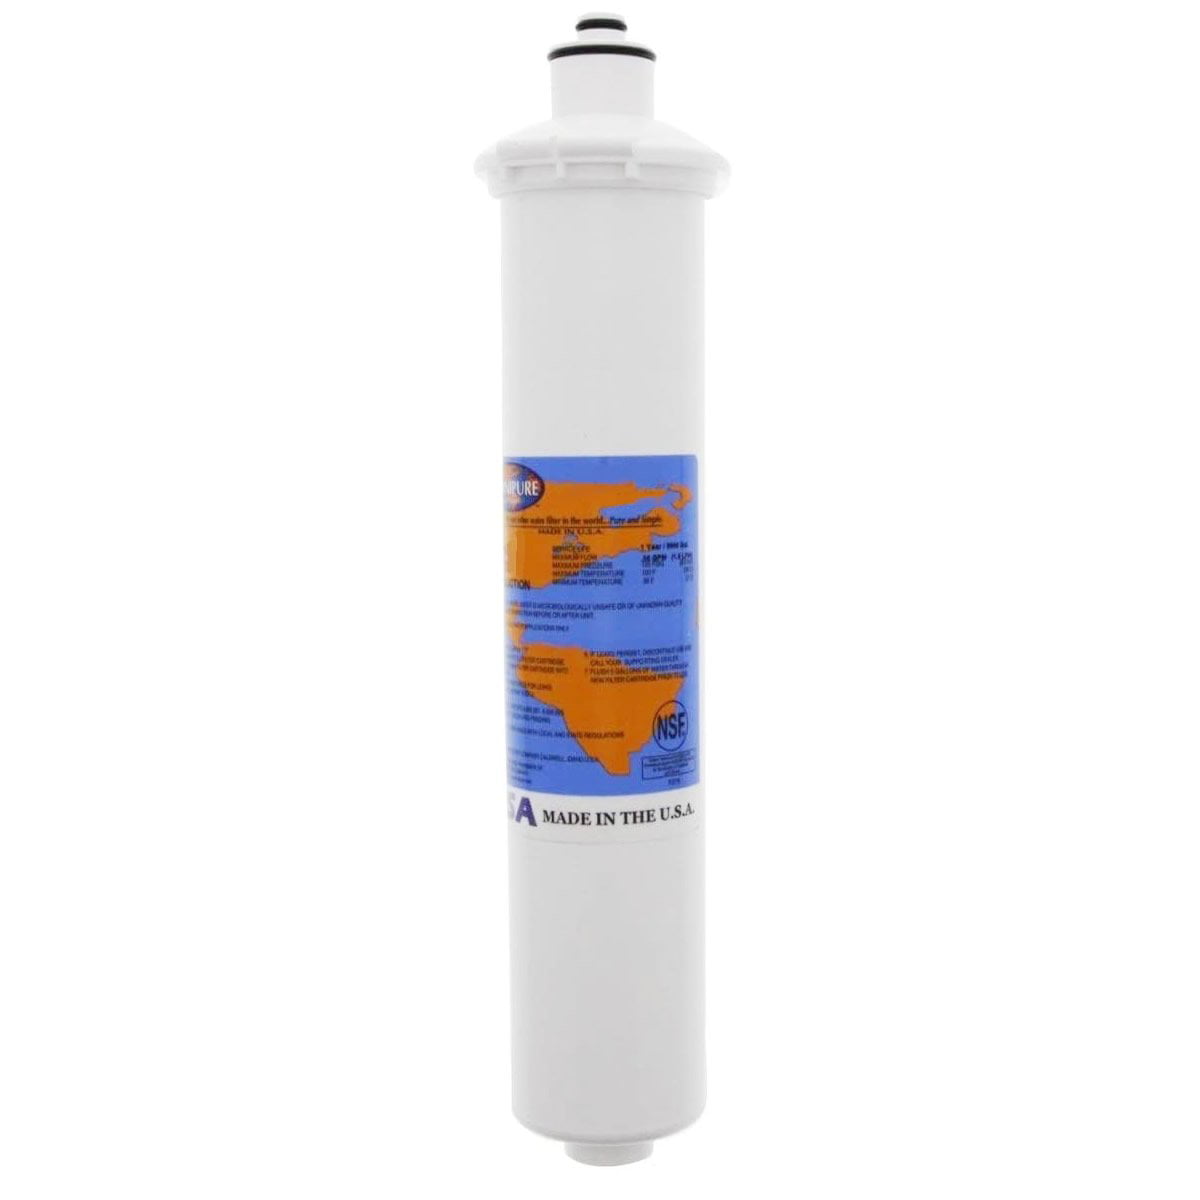 Omnipure L5615 2.5 x 12 L-Series GAC with Lead Removal Filter Cartridge